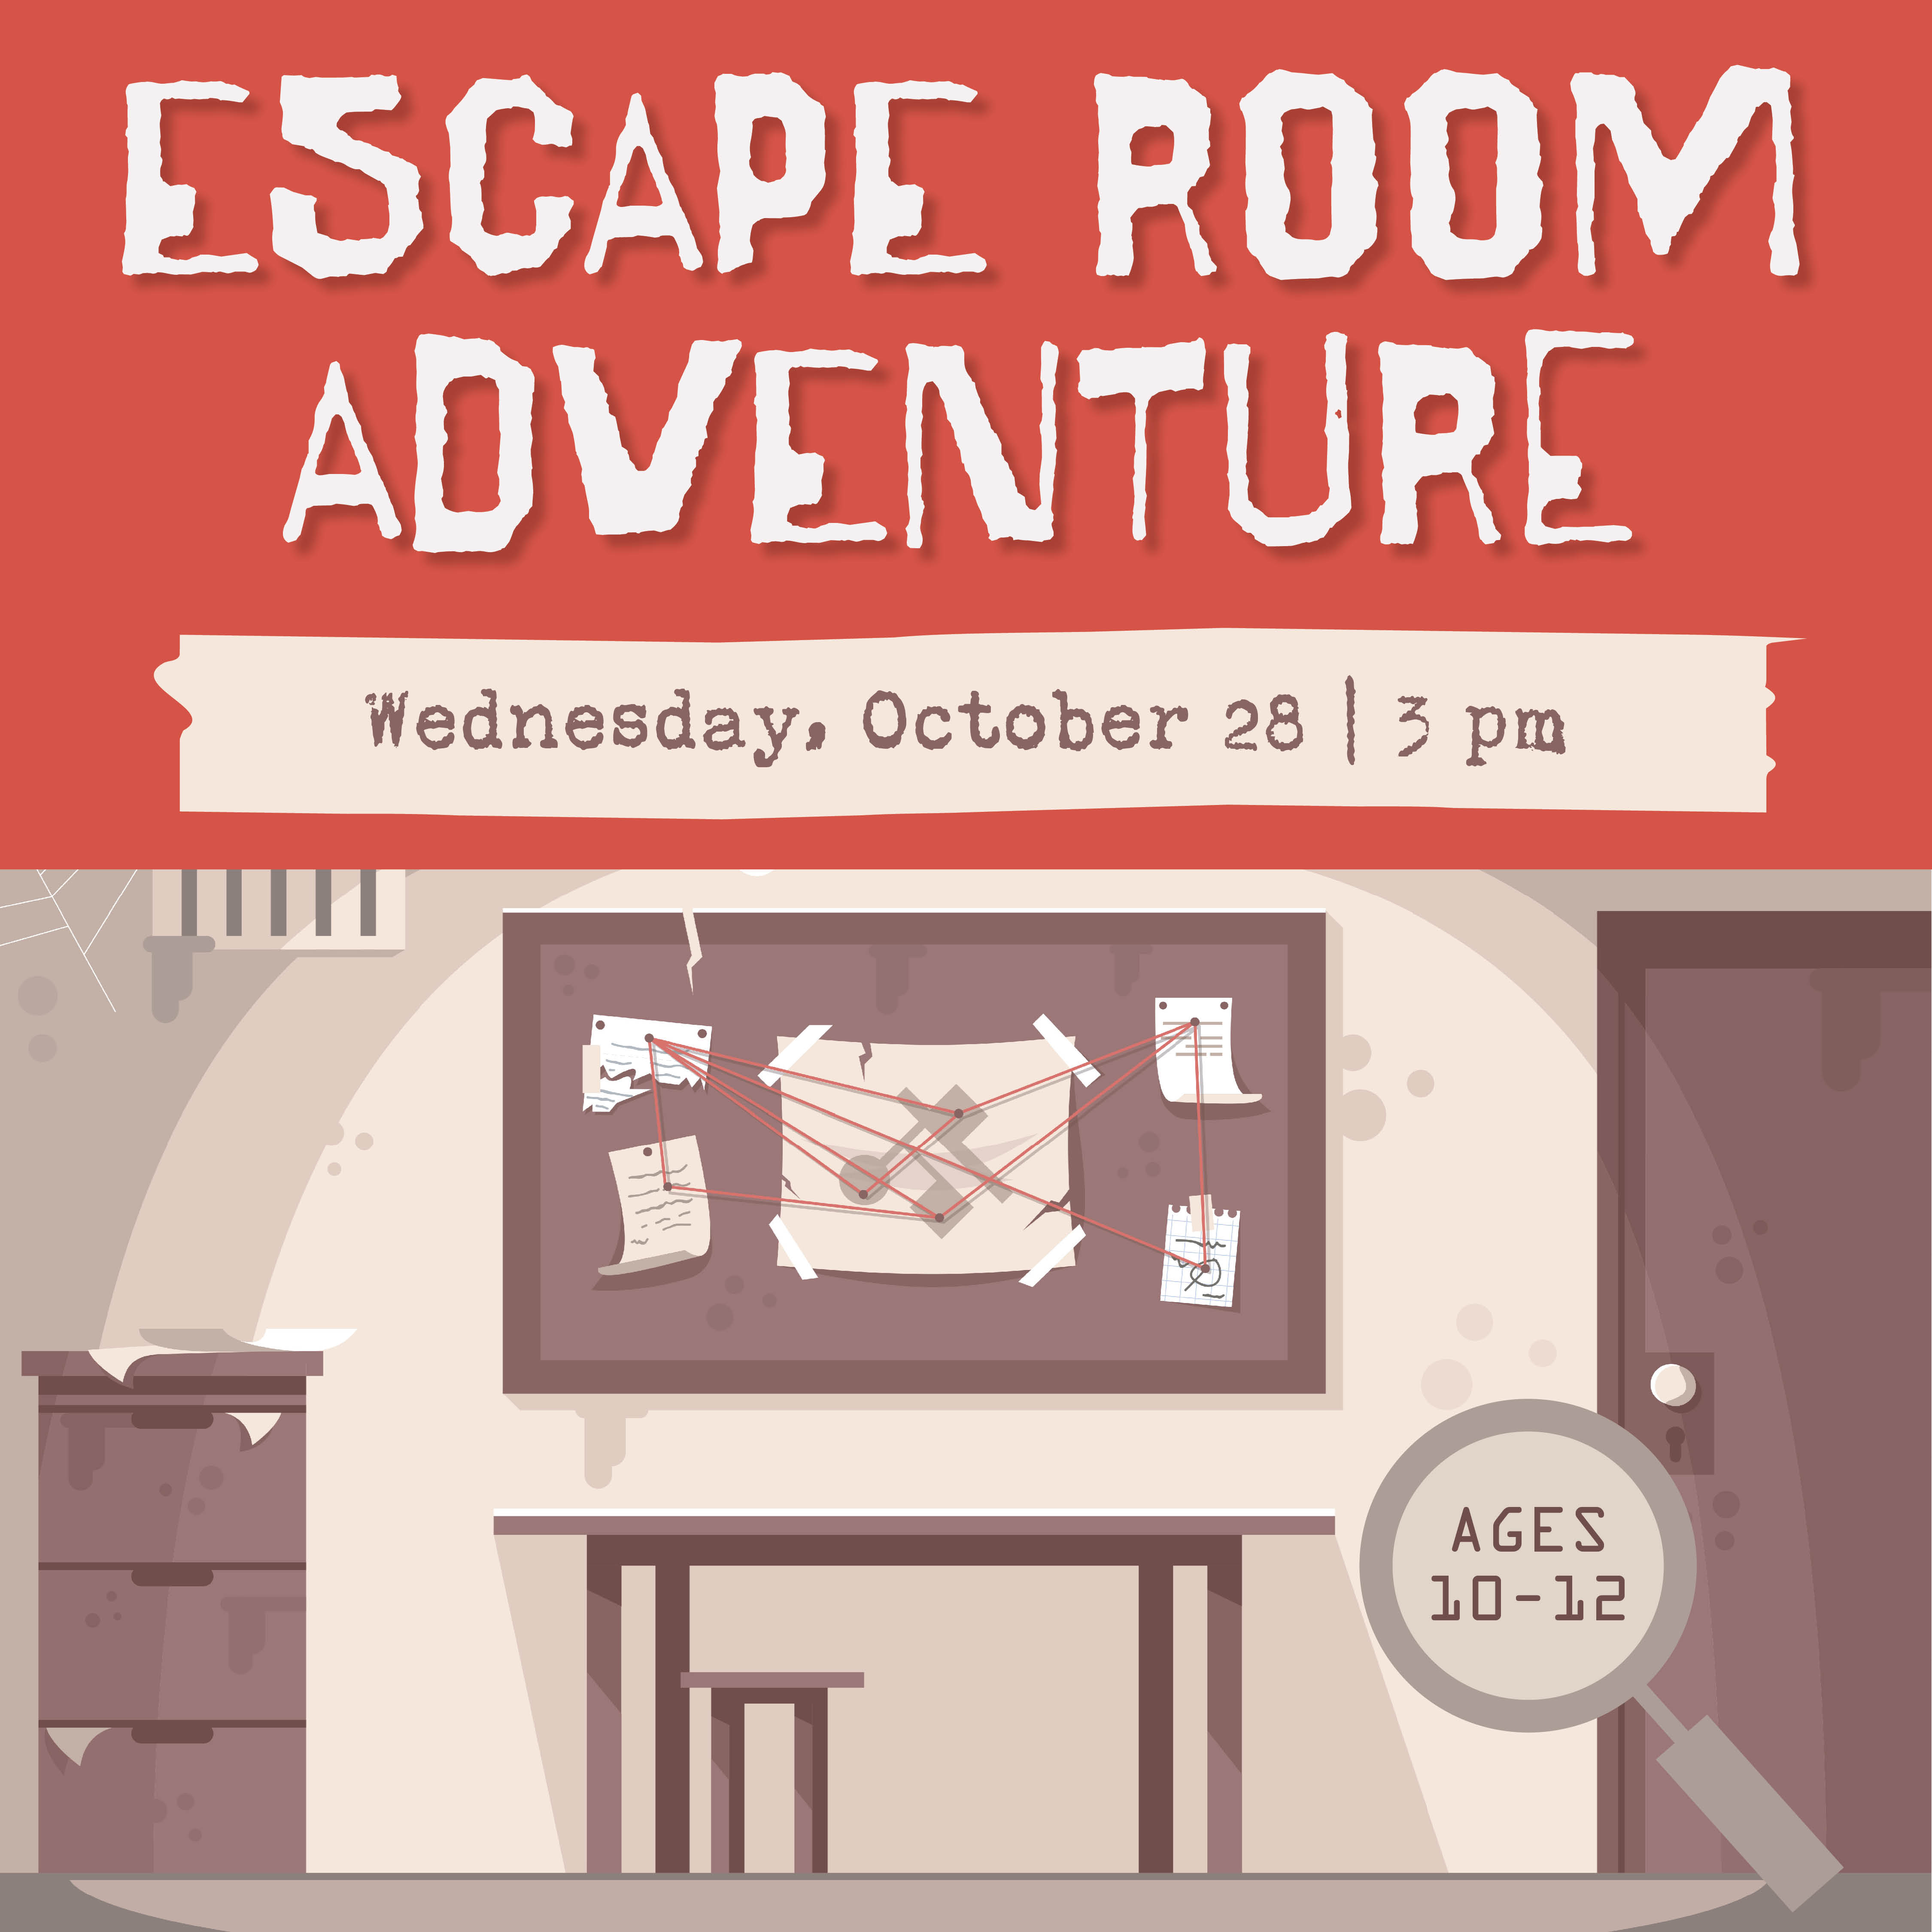 Escape Room Adventure. Wednesday, October 28 at 3 PM. Ages 10-12.